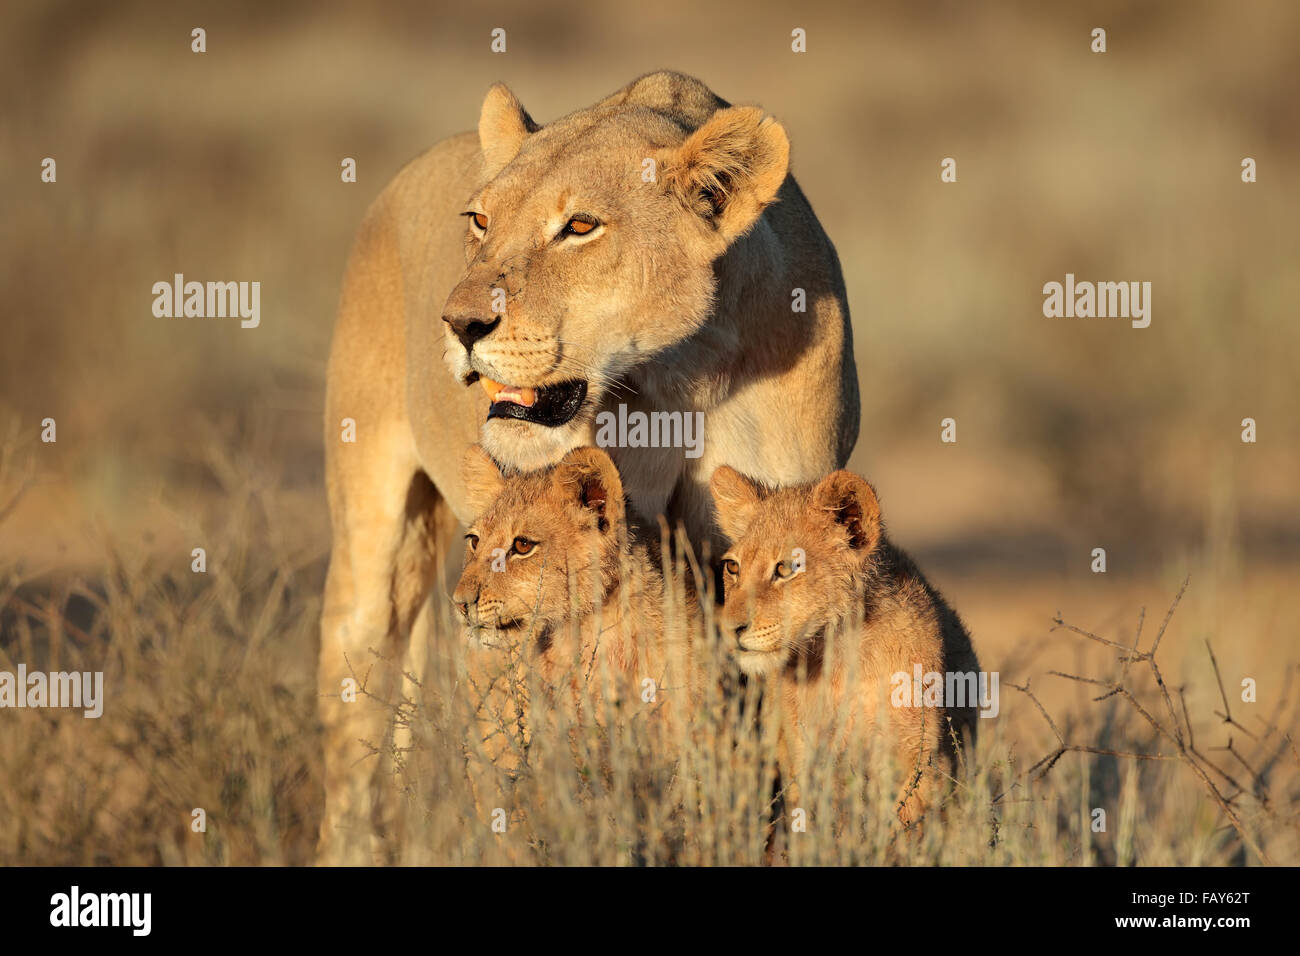 Lioness with young lion cubs (Panthera leo) in early morning light, Kalahari desert, South Africa Stock Photo